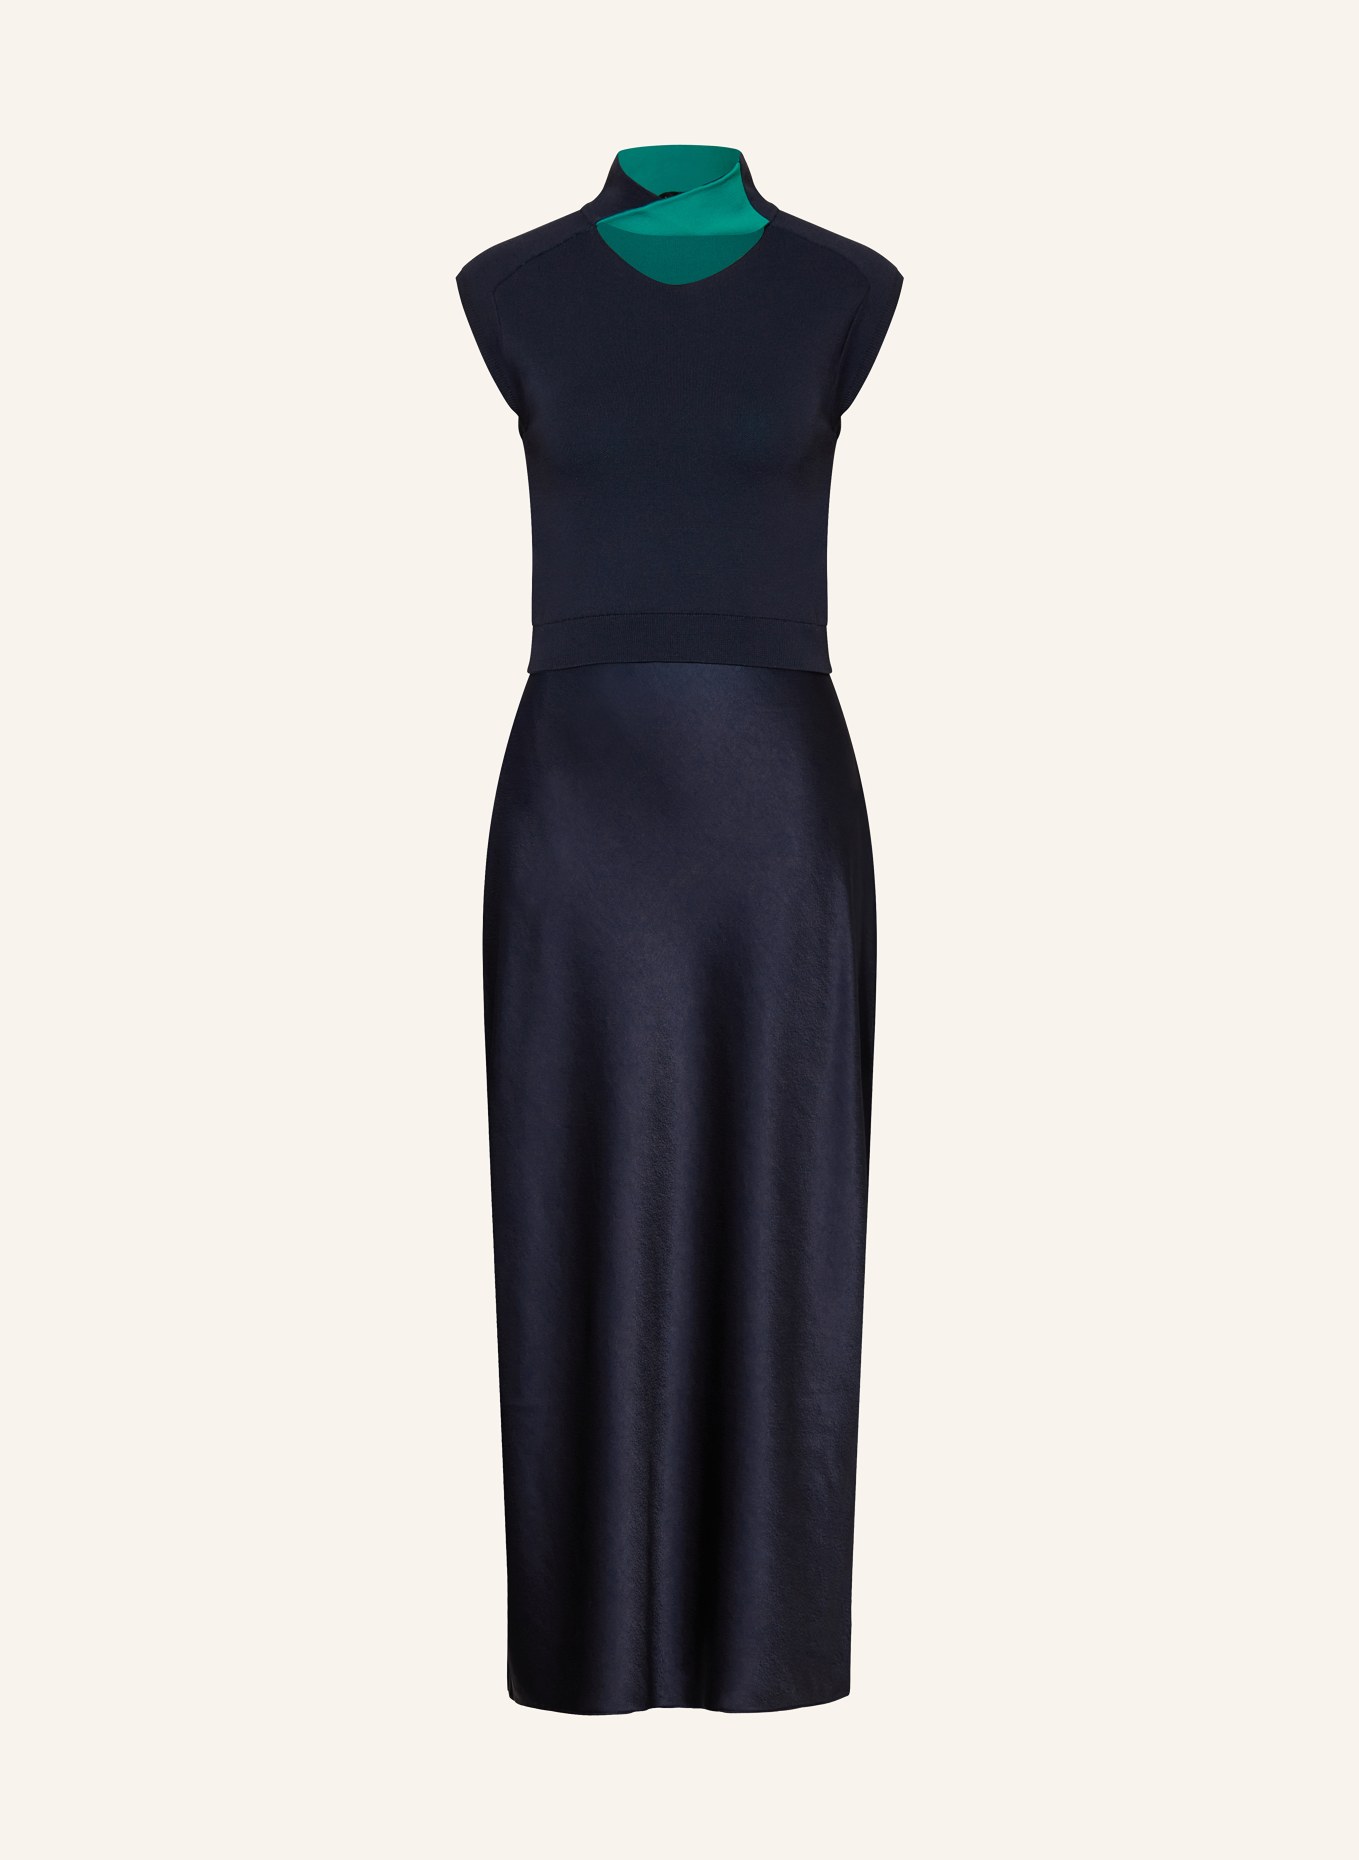 TED BAKER Kleid PAOLLA im Materialmix mit Cut-out, Farbe: DUNKELBLAU (Bild 1)